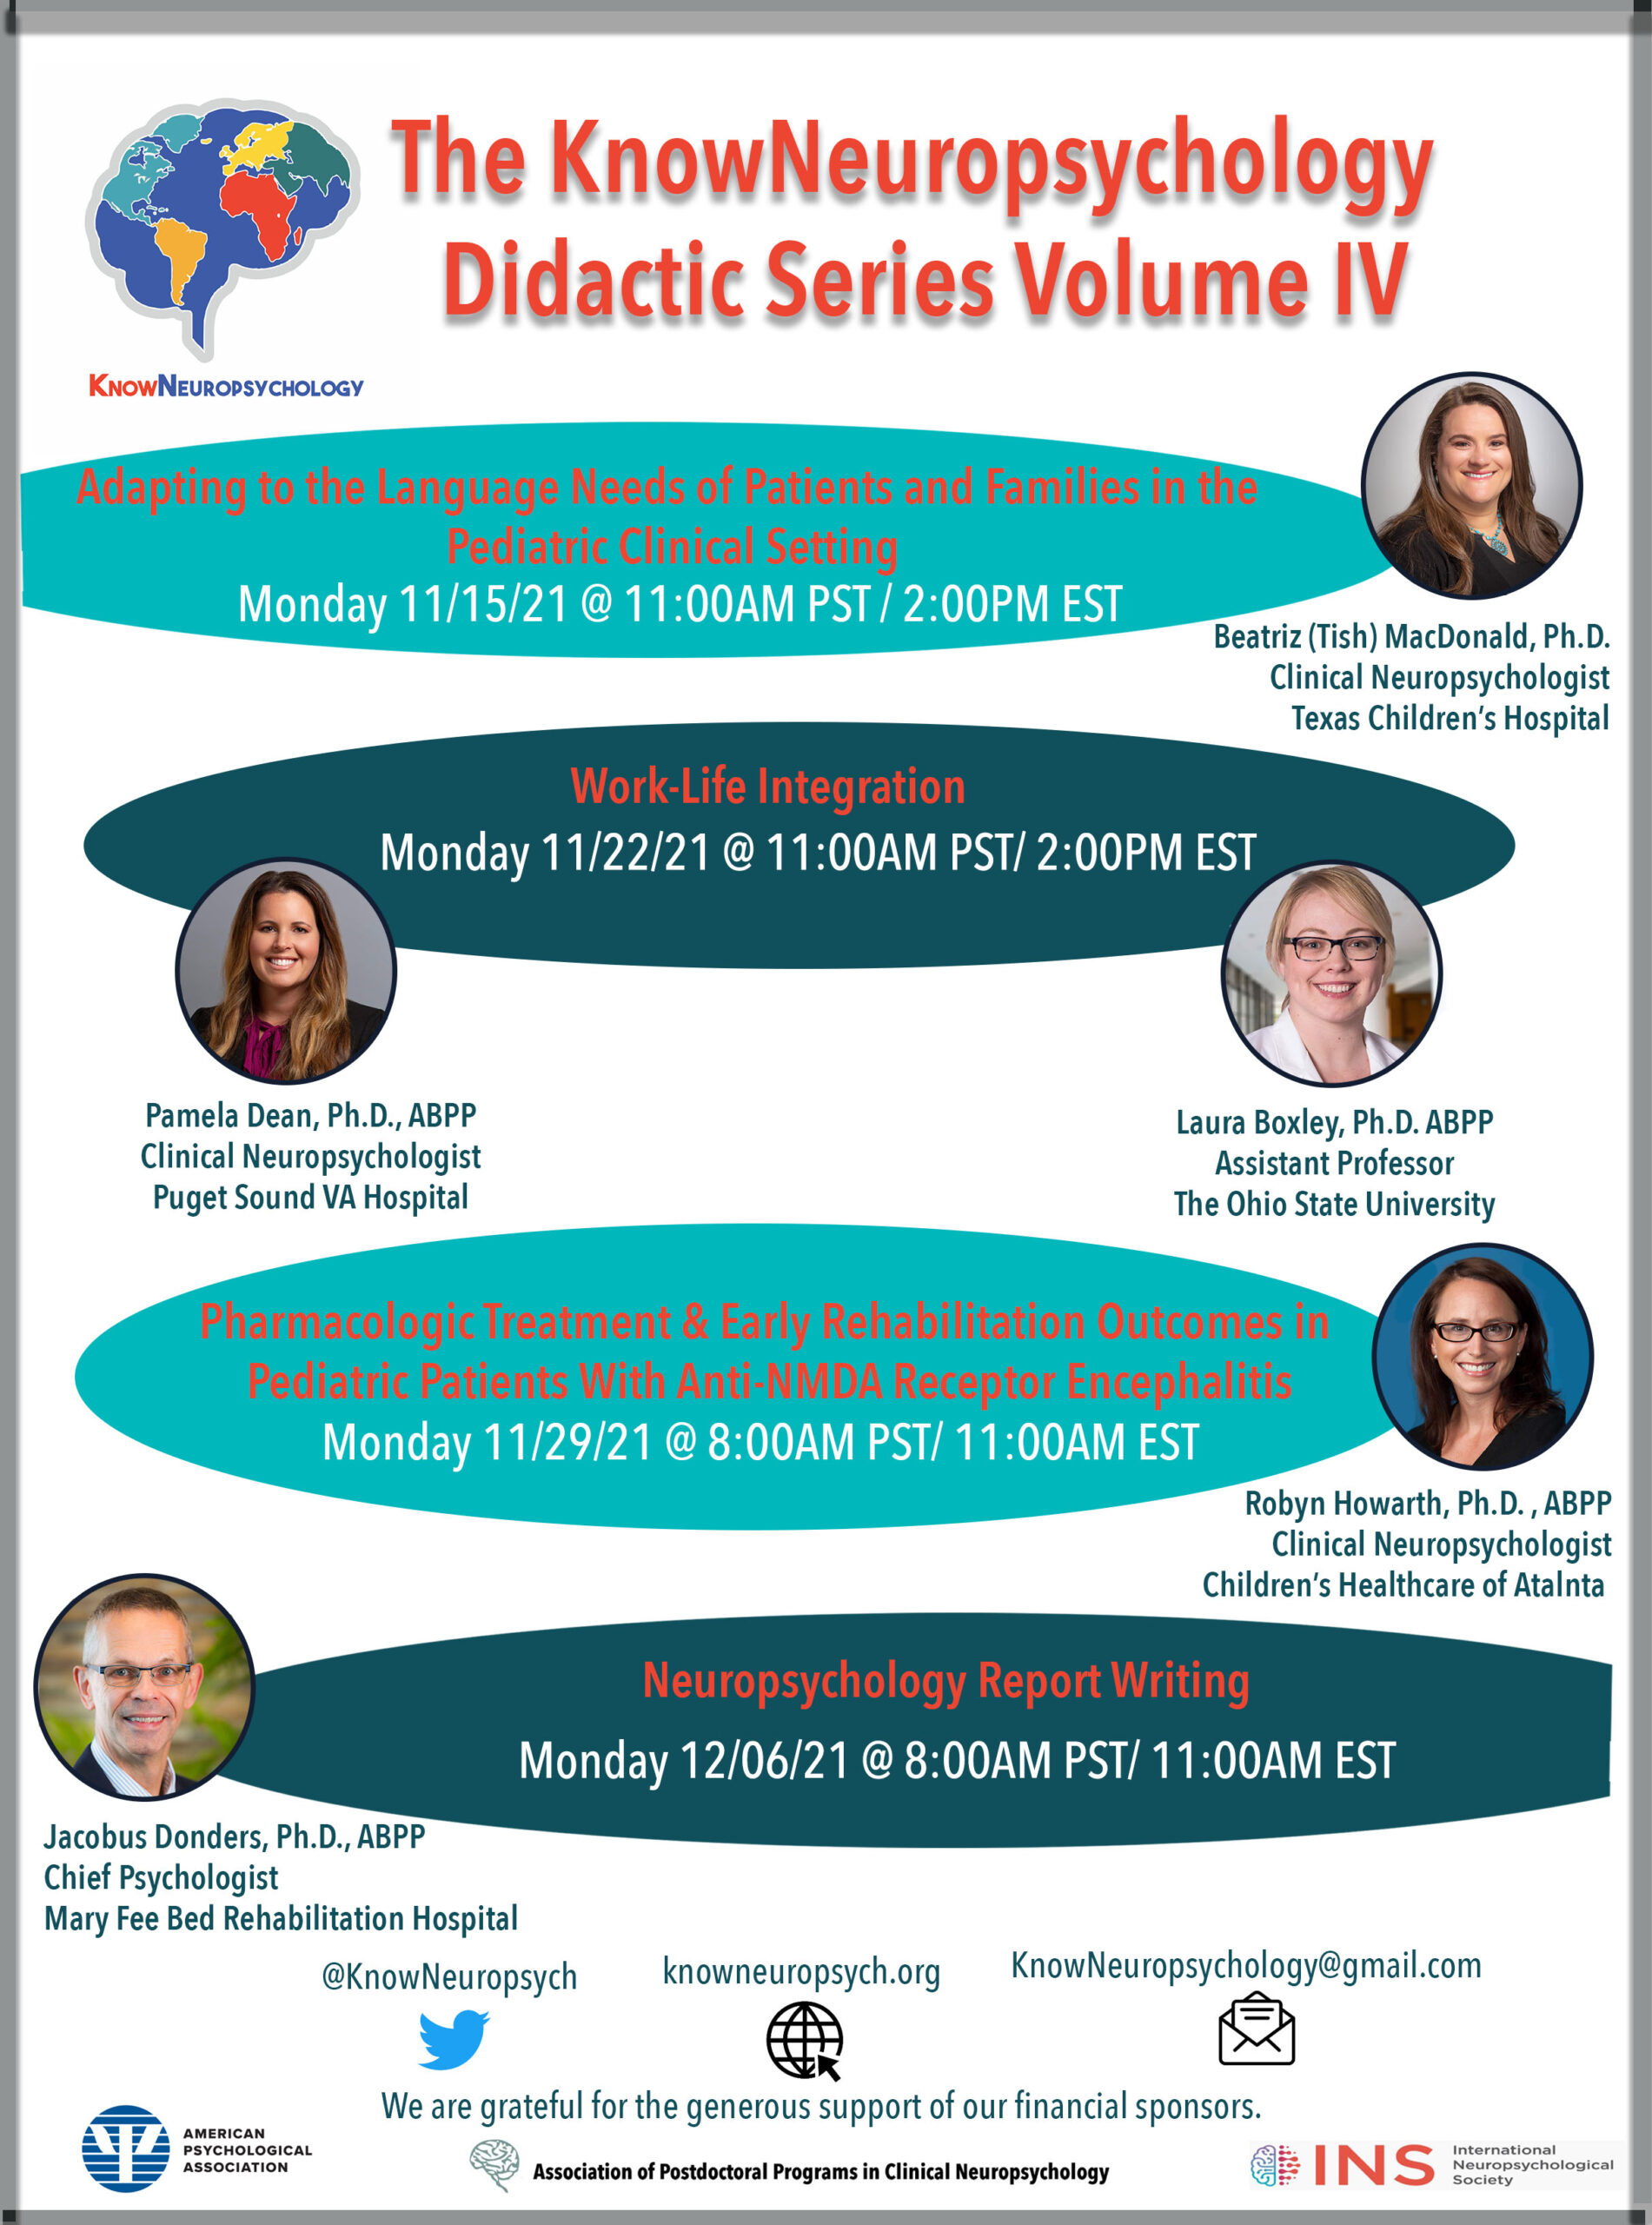 KnowNeuropsychology Didactic Series Volume IV - 11/15/21 @ 2pm EST working with interpreters with Dr. Beatriz MacDonald. 11/22/21 @ 2pm EST work life integration with Dr. Pamela Dean and Dr. Laura Boxley. 11/29/21 @ 11am EST Pharmacologic treatment in pediatric patients with anti-NMDA receptor encephalitis by Dr. Robyn Howarth. 12/6/21 @ 10am EST report writing with Dr. Jacobus Donders.